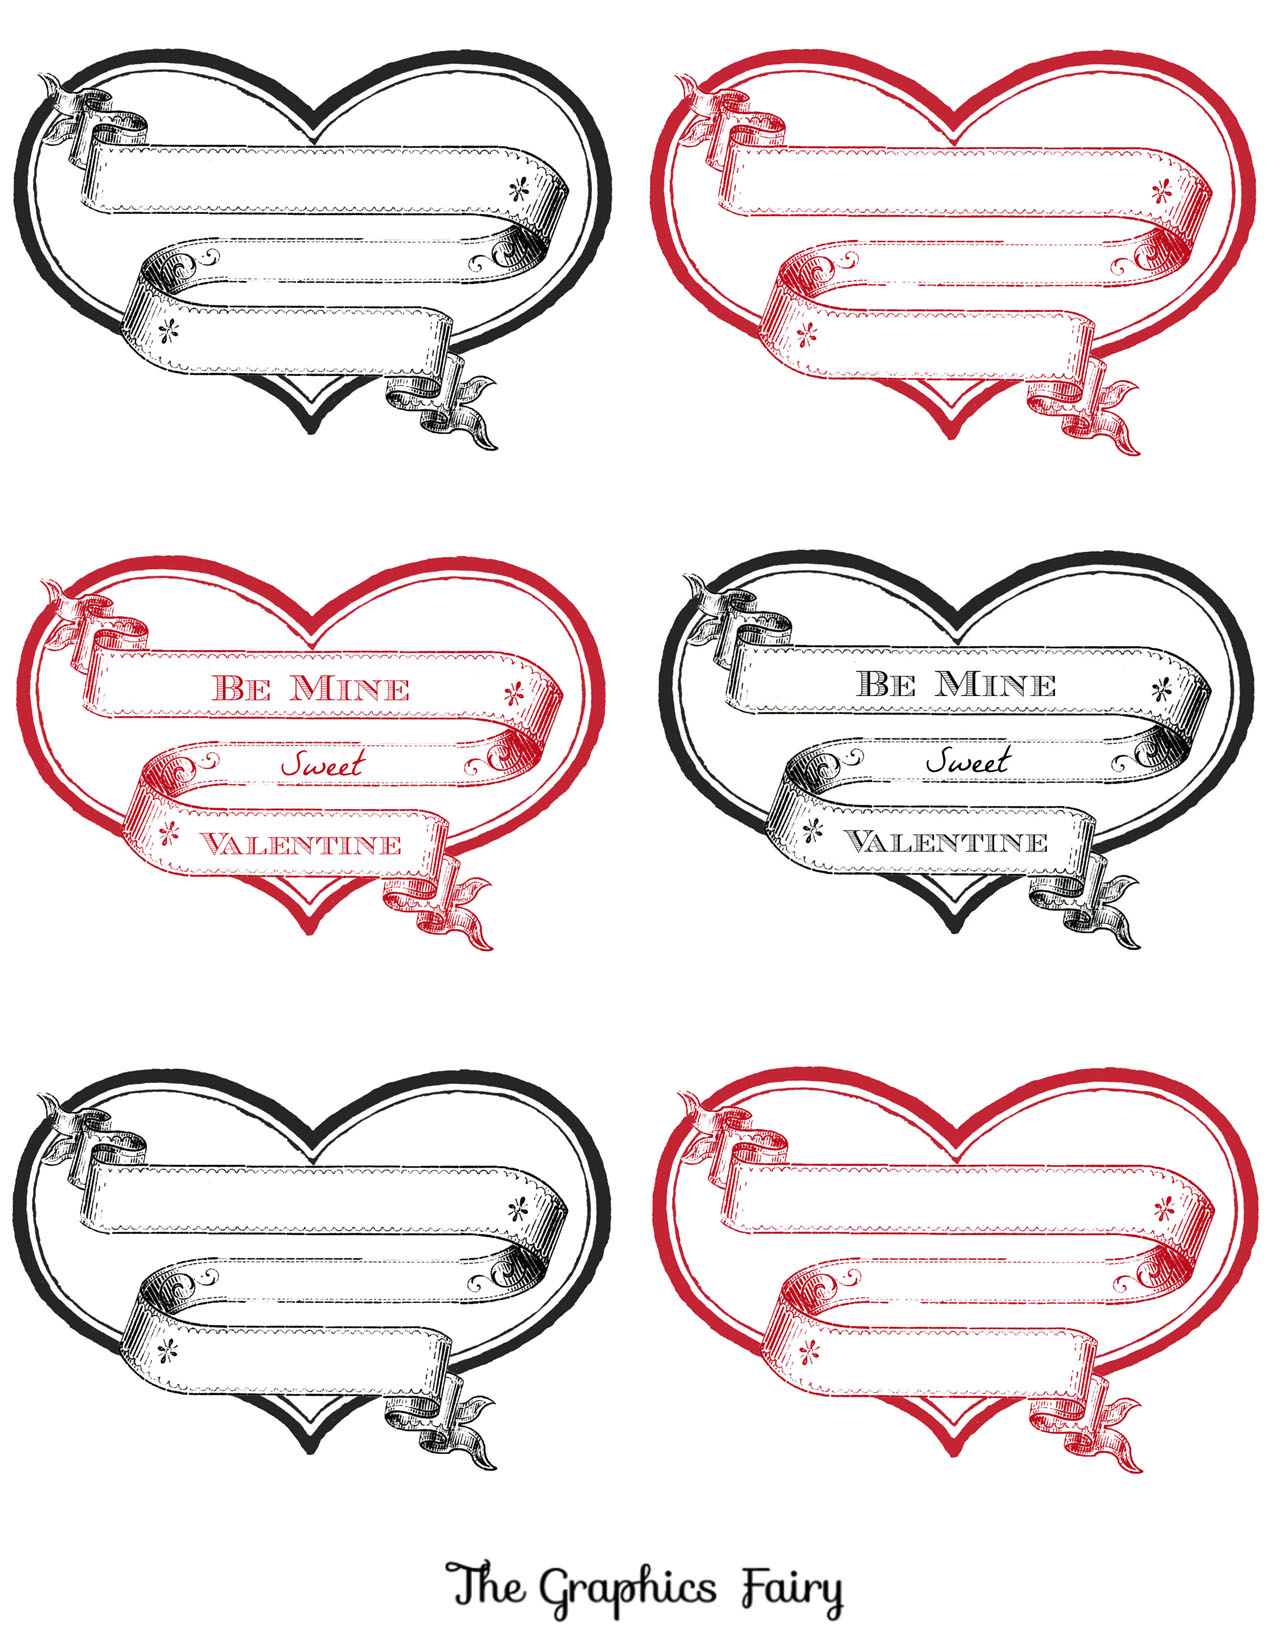 VICTORIAN VALENTINE HEARTS Instant Digital Download Antique Valentine  Collage Sheet Printable Sweetheart Hearts 